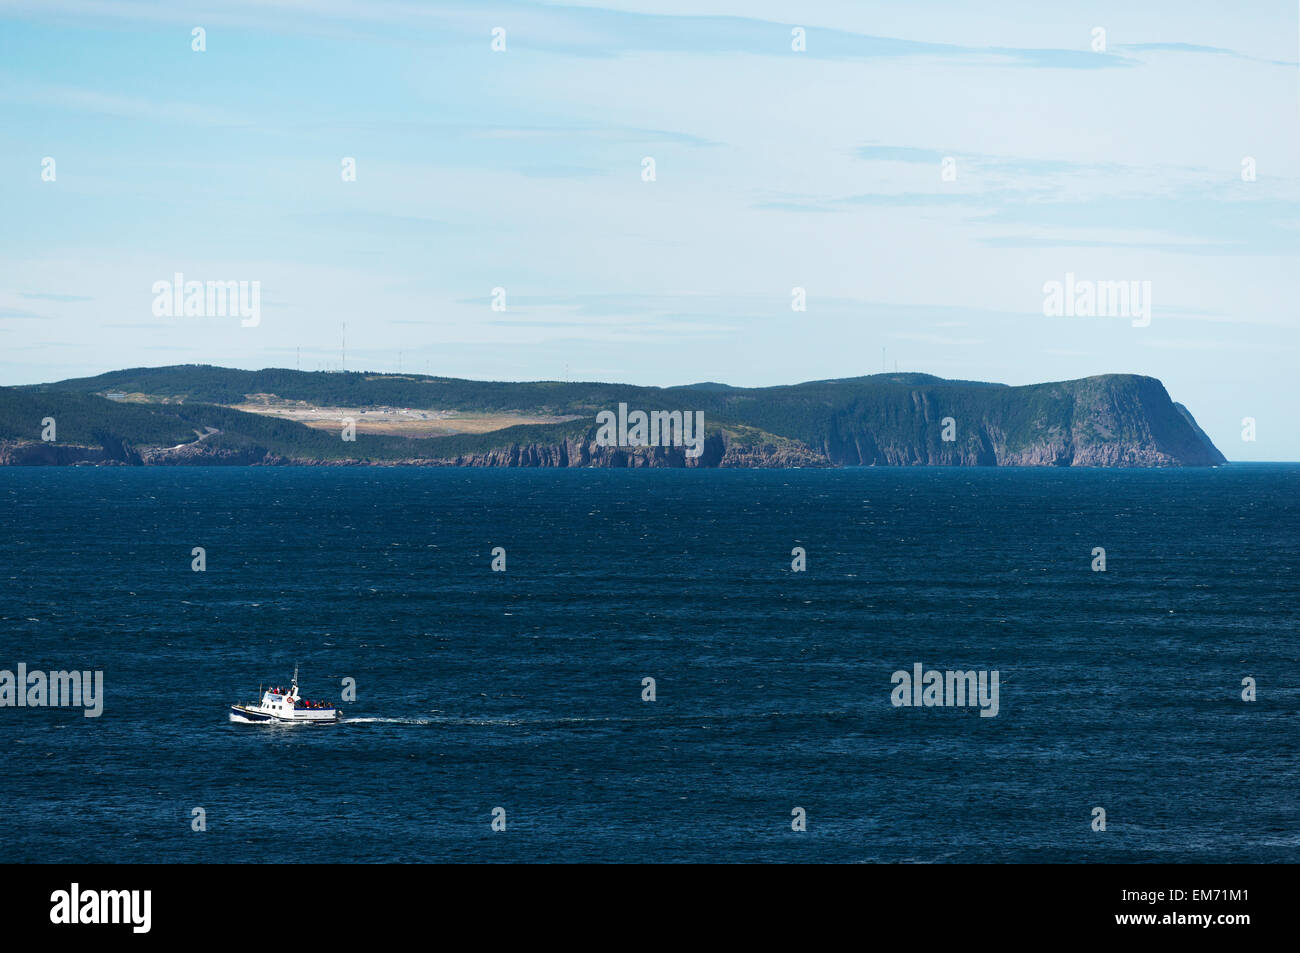 A boat on the water in Cape Spear; St. John's, Newfoundland and Labrador, Canada Stock Photo